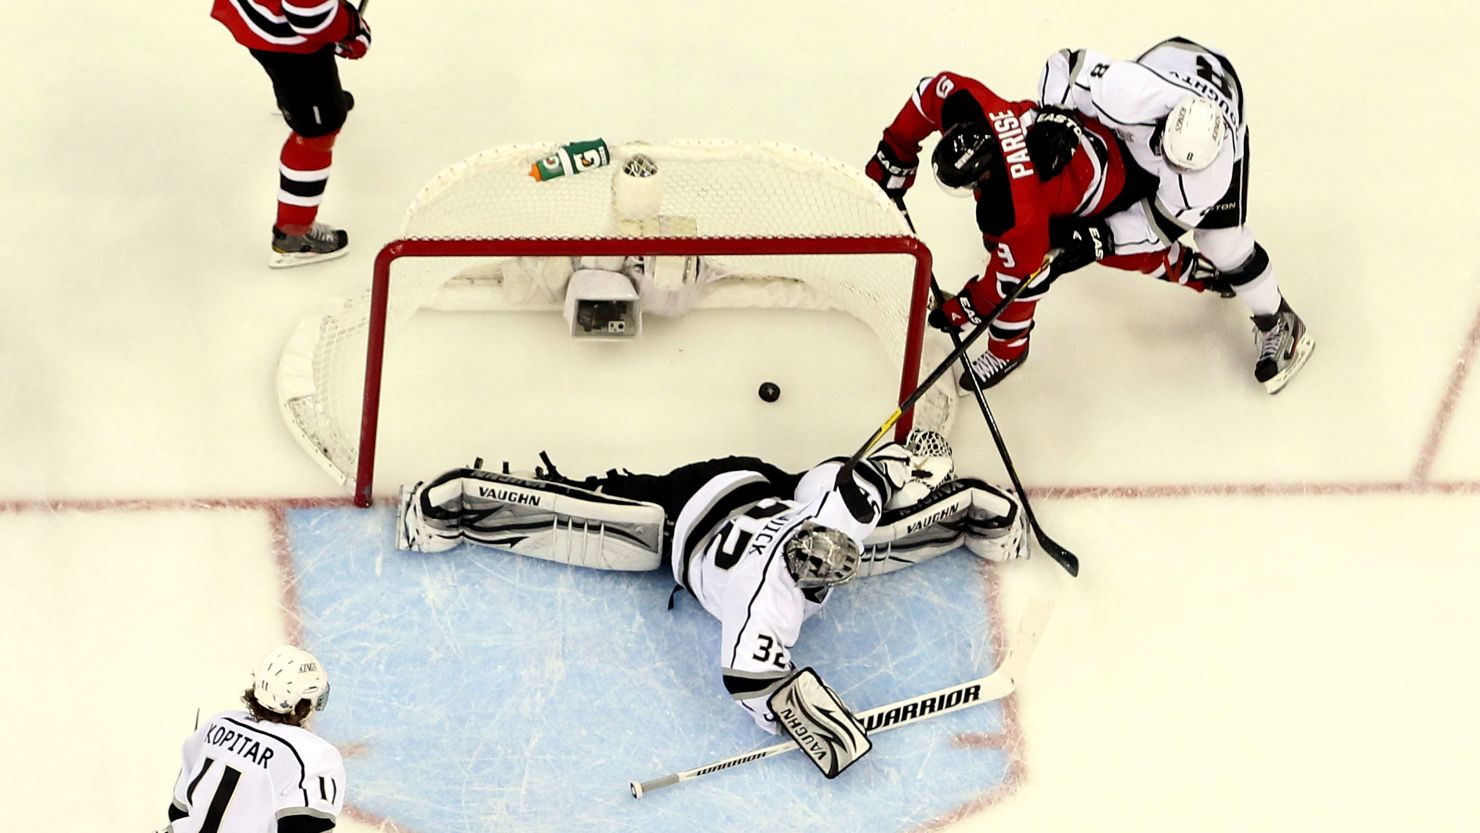 Zach Parise of the New Jersey Devils scores a goal against L.A. Kings goalie Jonathan Quick during Game 6 of the Stanley Cup finals.